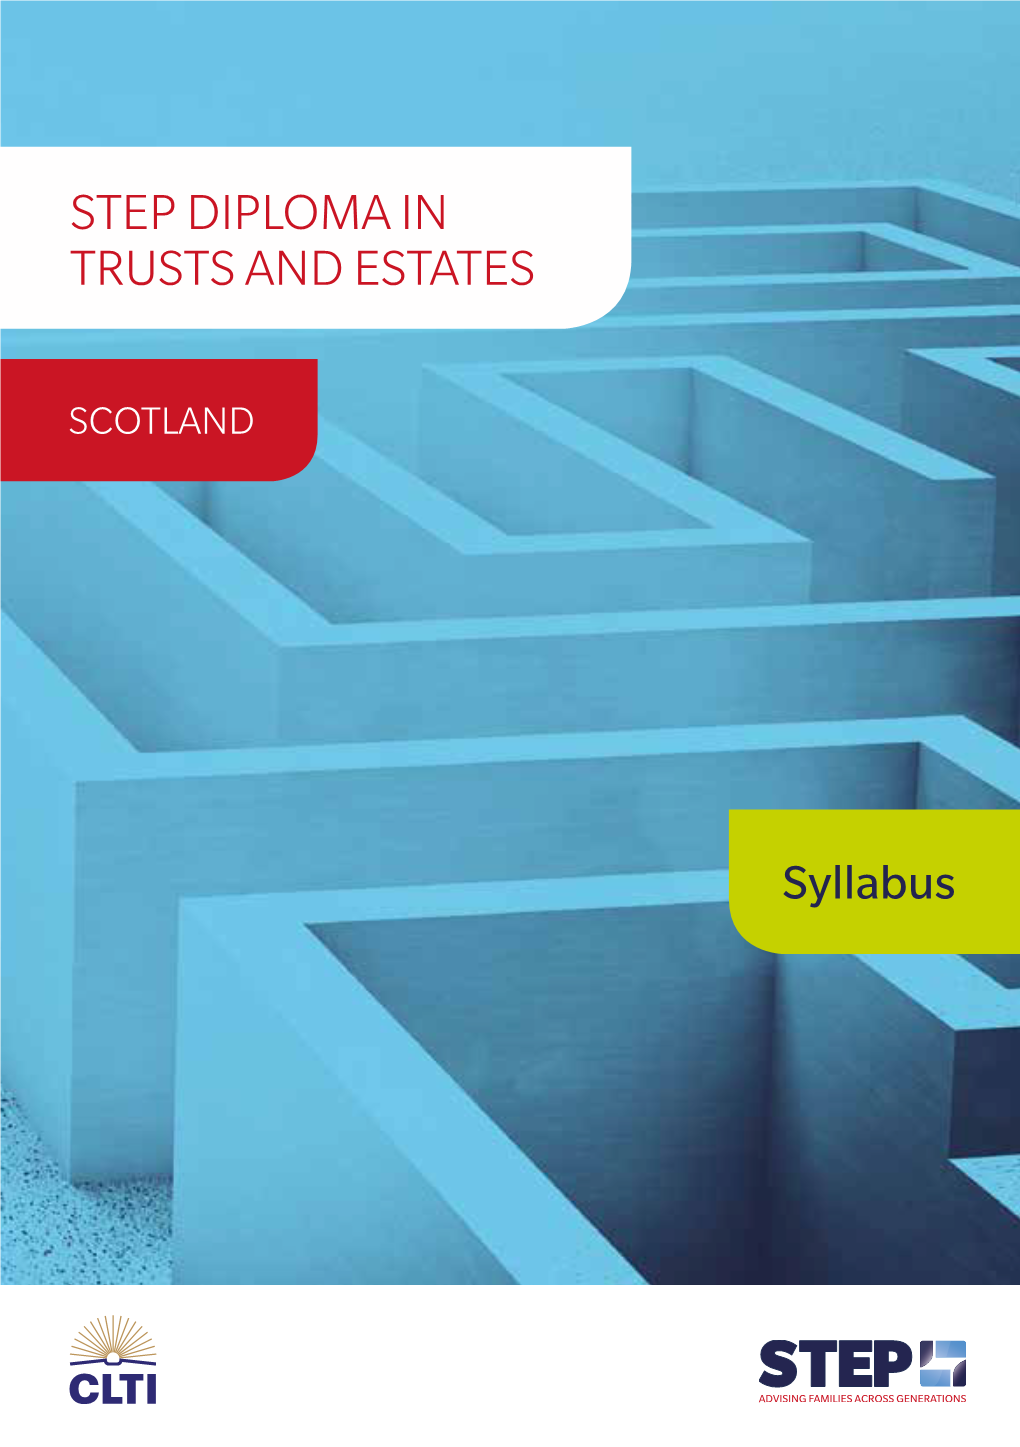 Step Diploma in Trusts and Estates